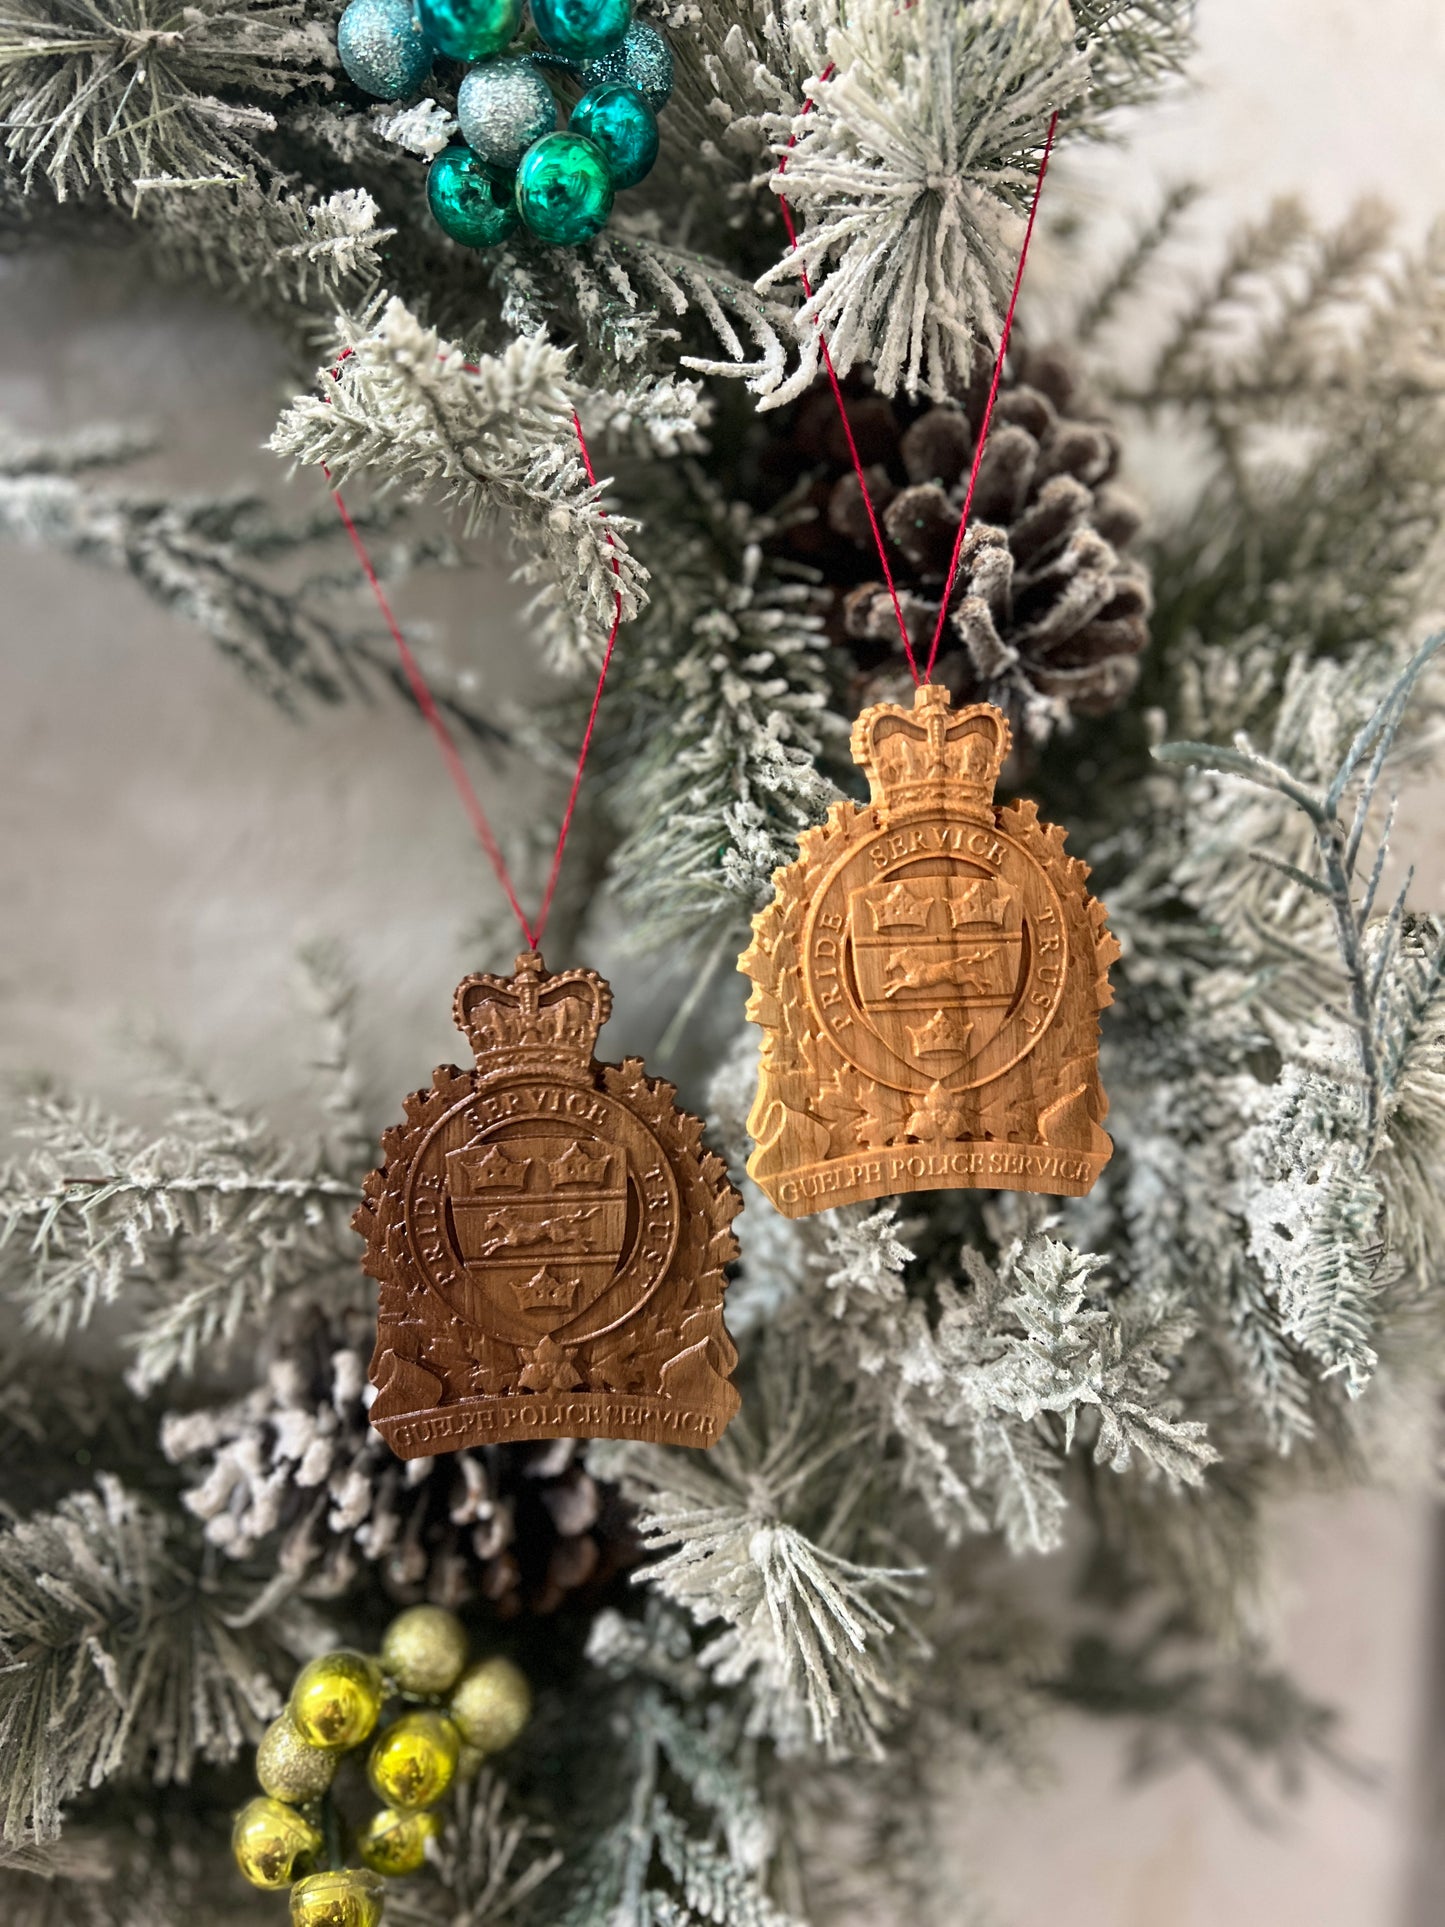 Guelph Police Christmas Ornament